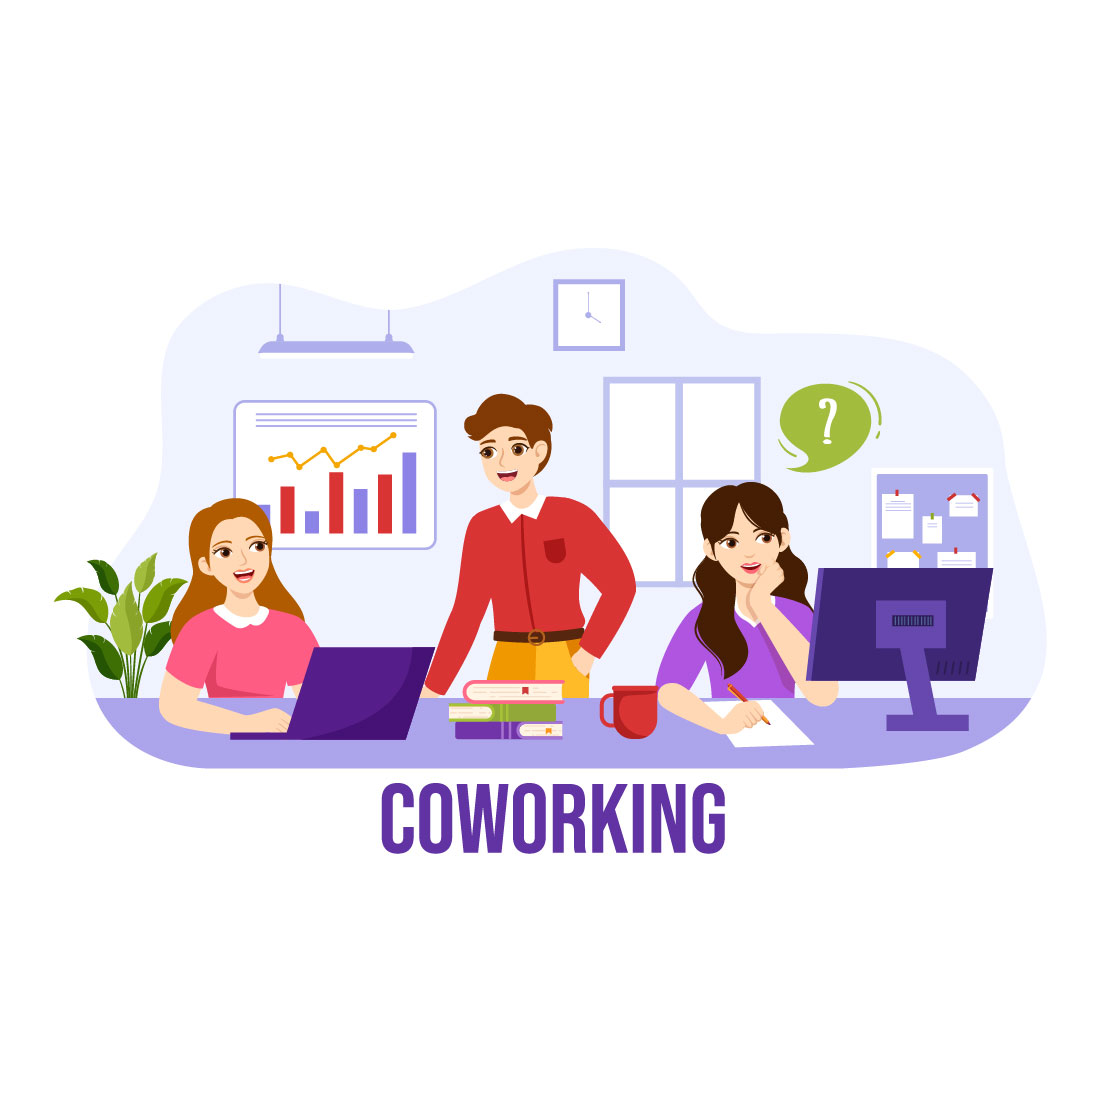 15 Coworking Business Illustration preview image.